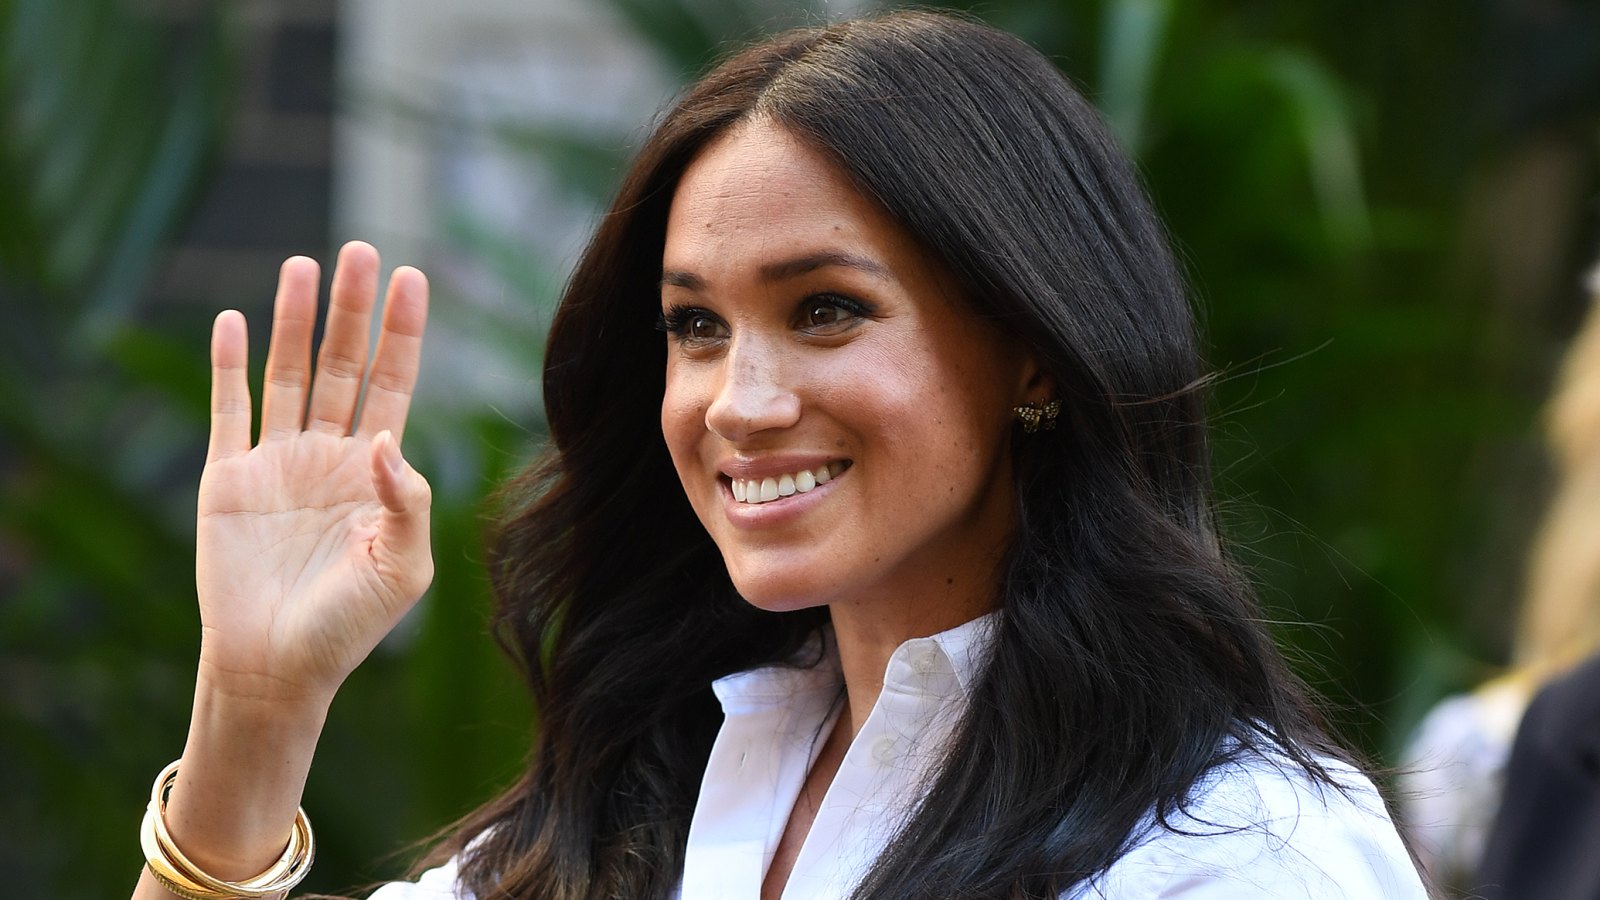 Meghan Markle, Duchess of Sussex, launches the Smart Works capsule in London.